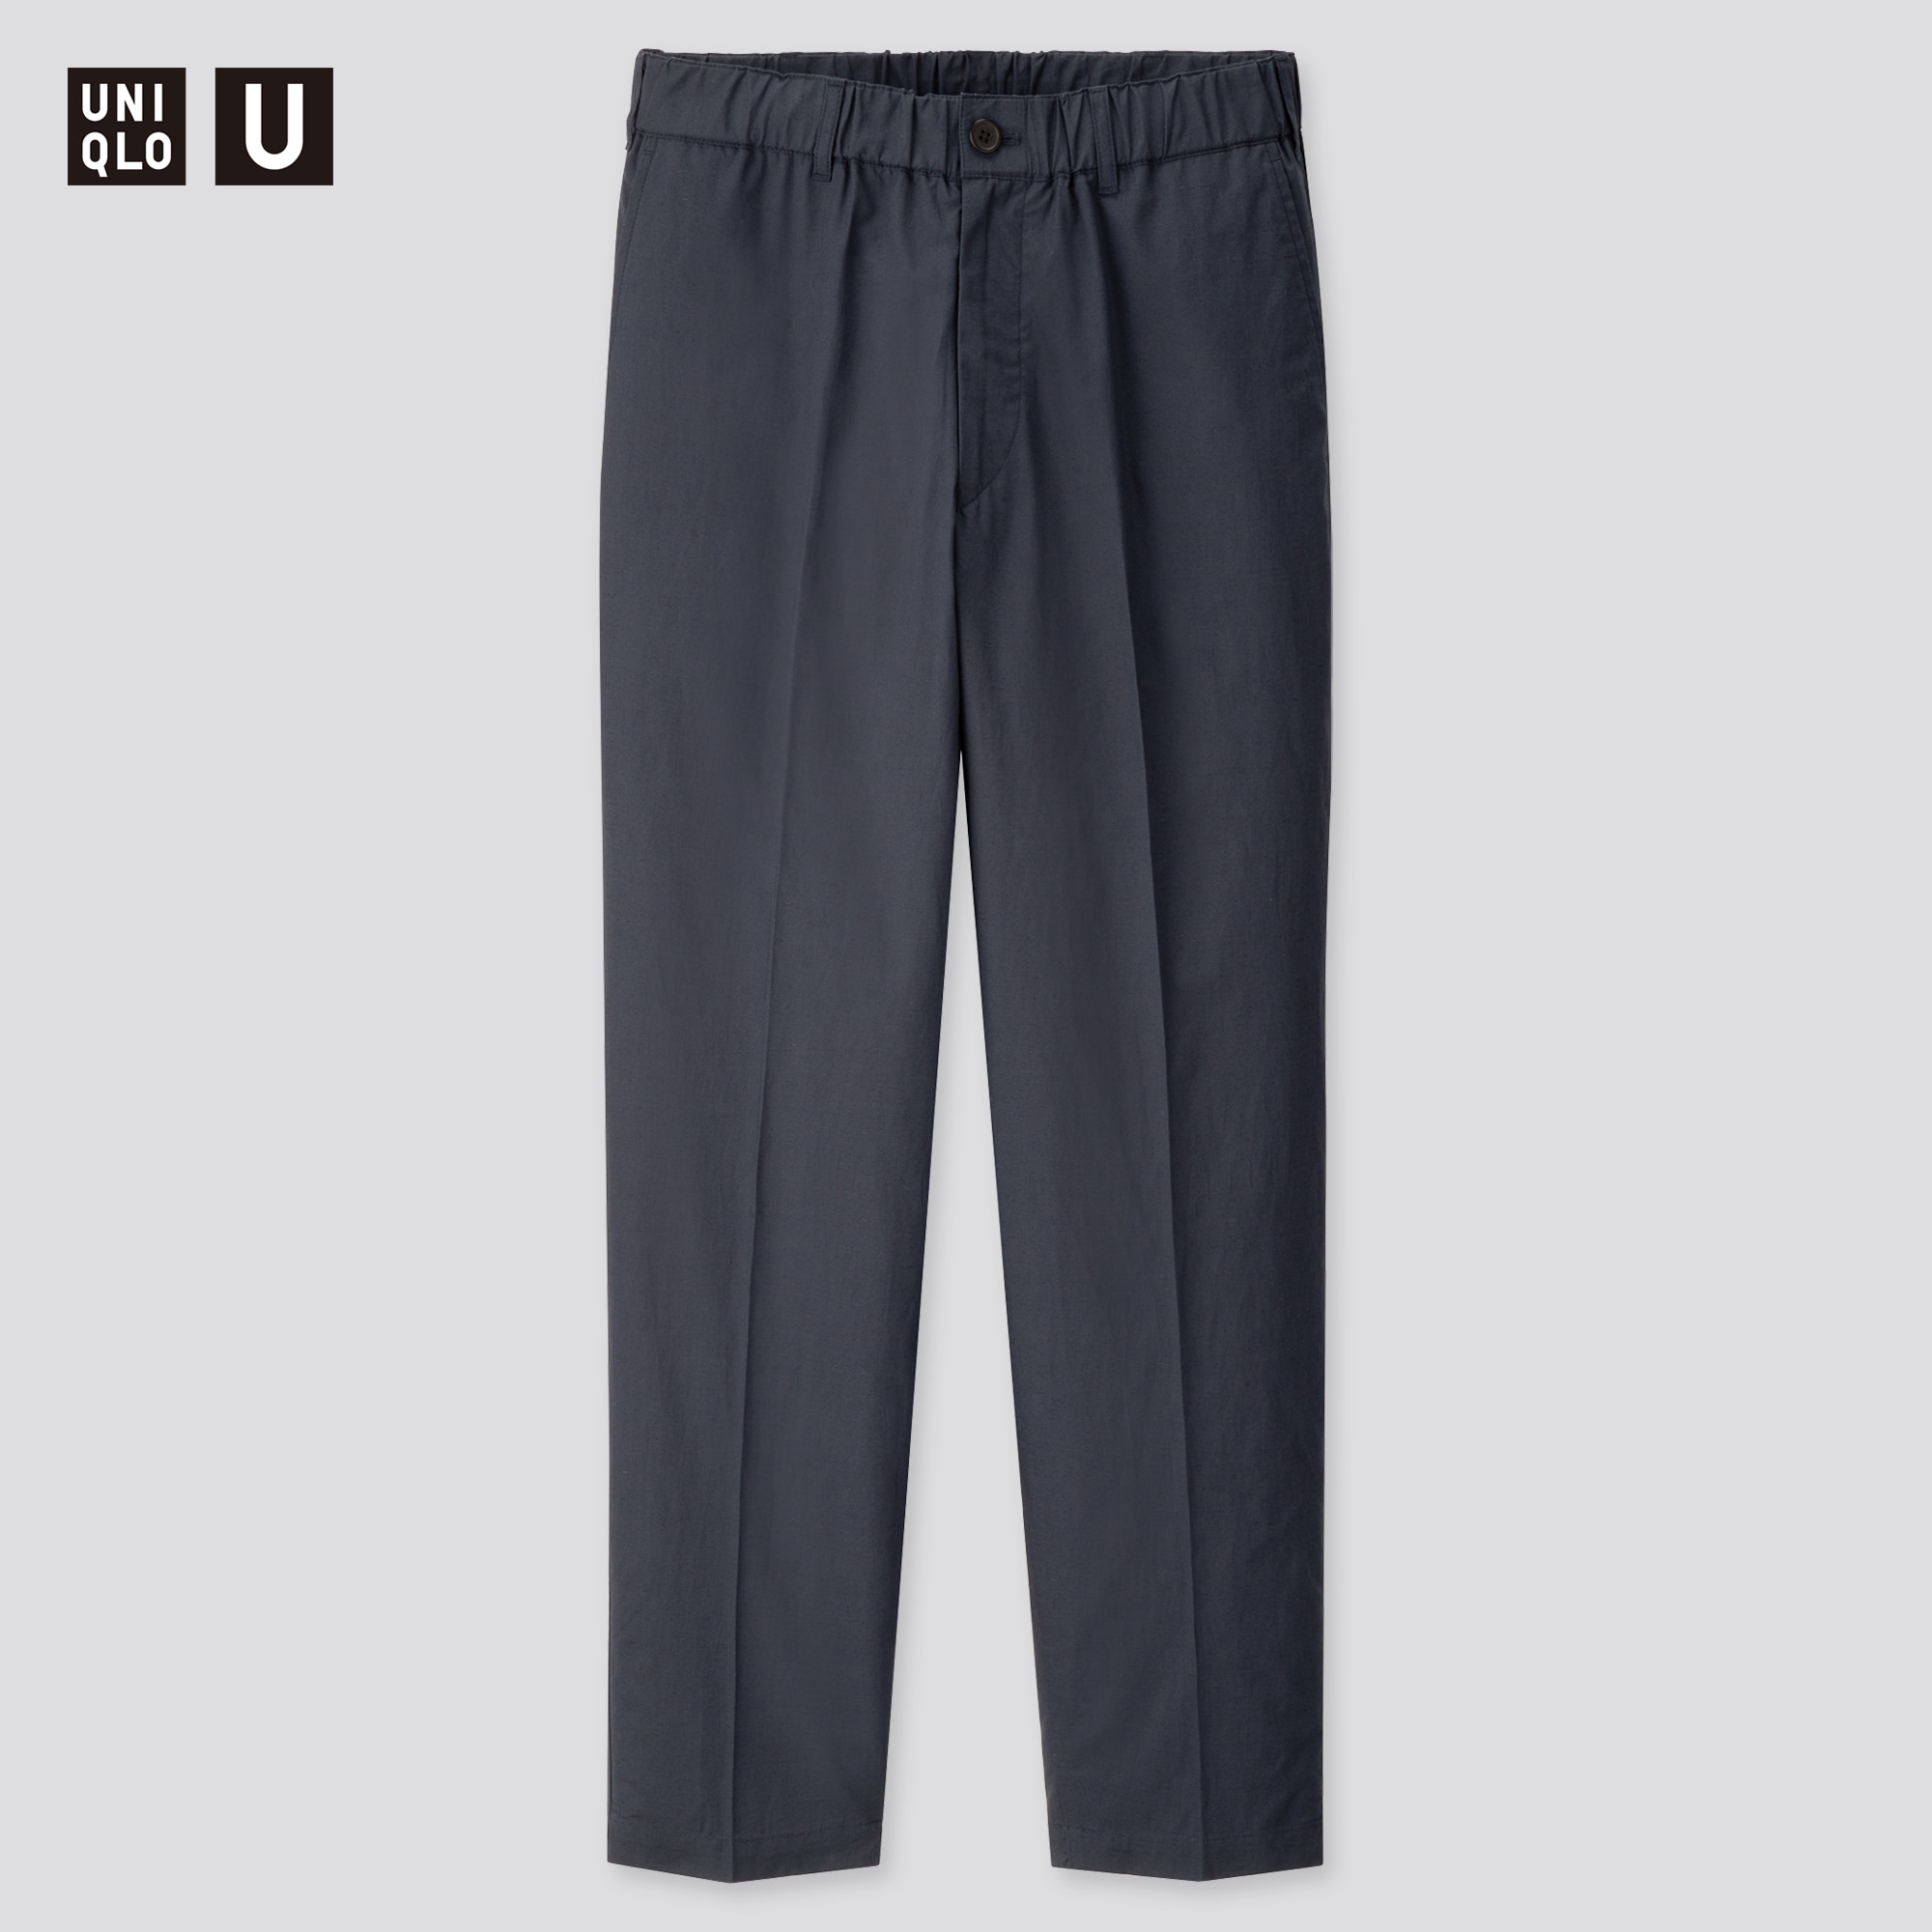 mens tapered linen pants